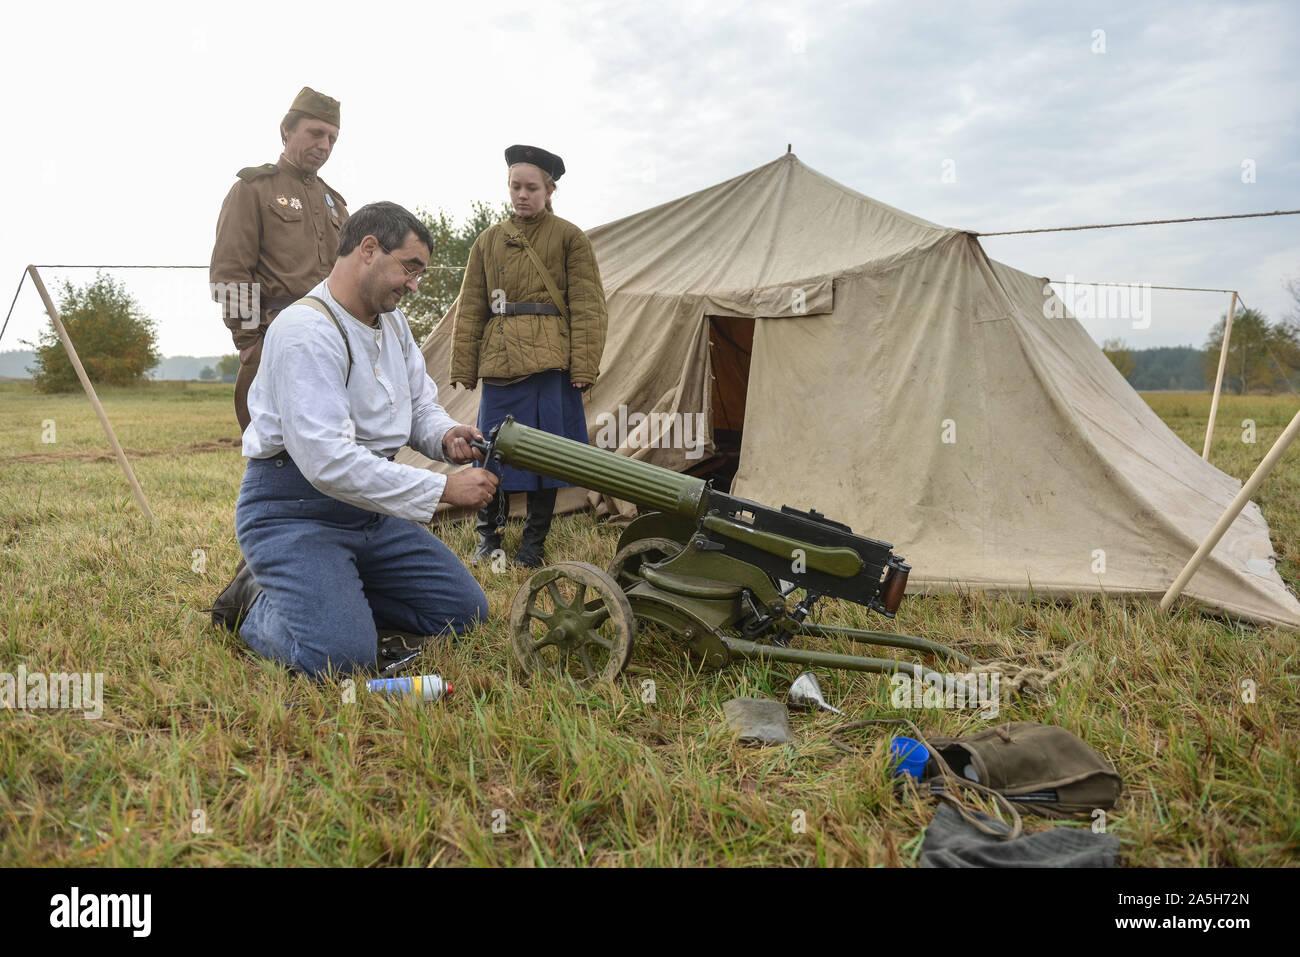 Ralsko, Czech Republic. 19th Oct, 2019. Event marking 30 years of freedom, with concerts, air shows, historical military vehicles, war films, exhibitions and discussion was held in Ralsko, Czech Republic, on October 19, 2019. Credit: Vit Cerny/CTK Photo/Alamy Live News Stock Photo